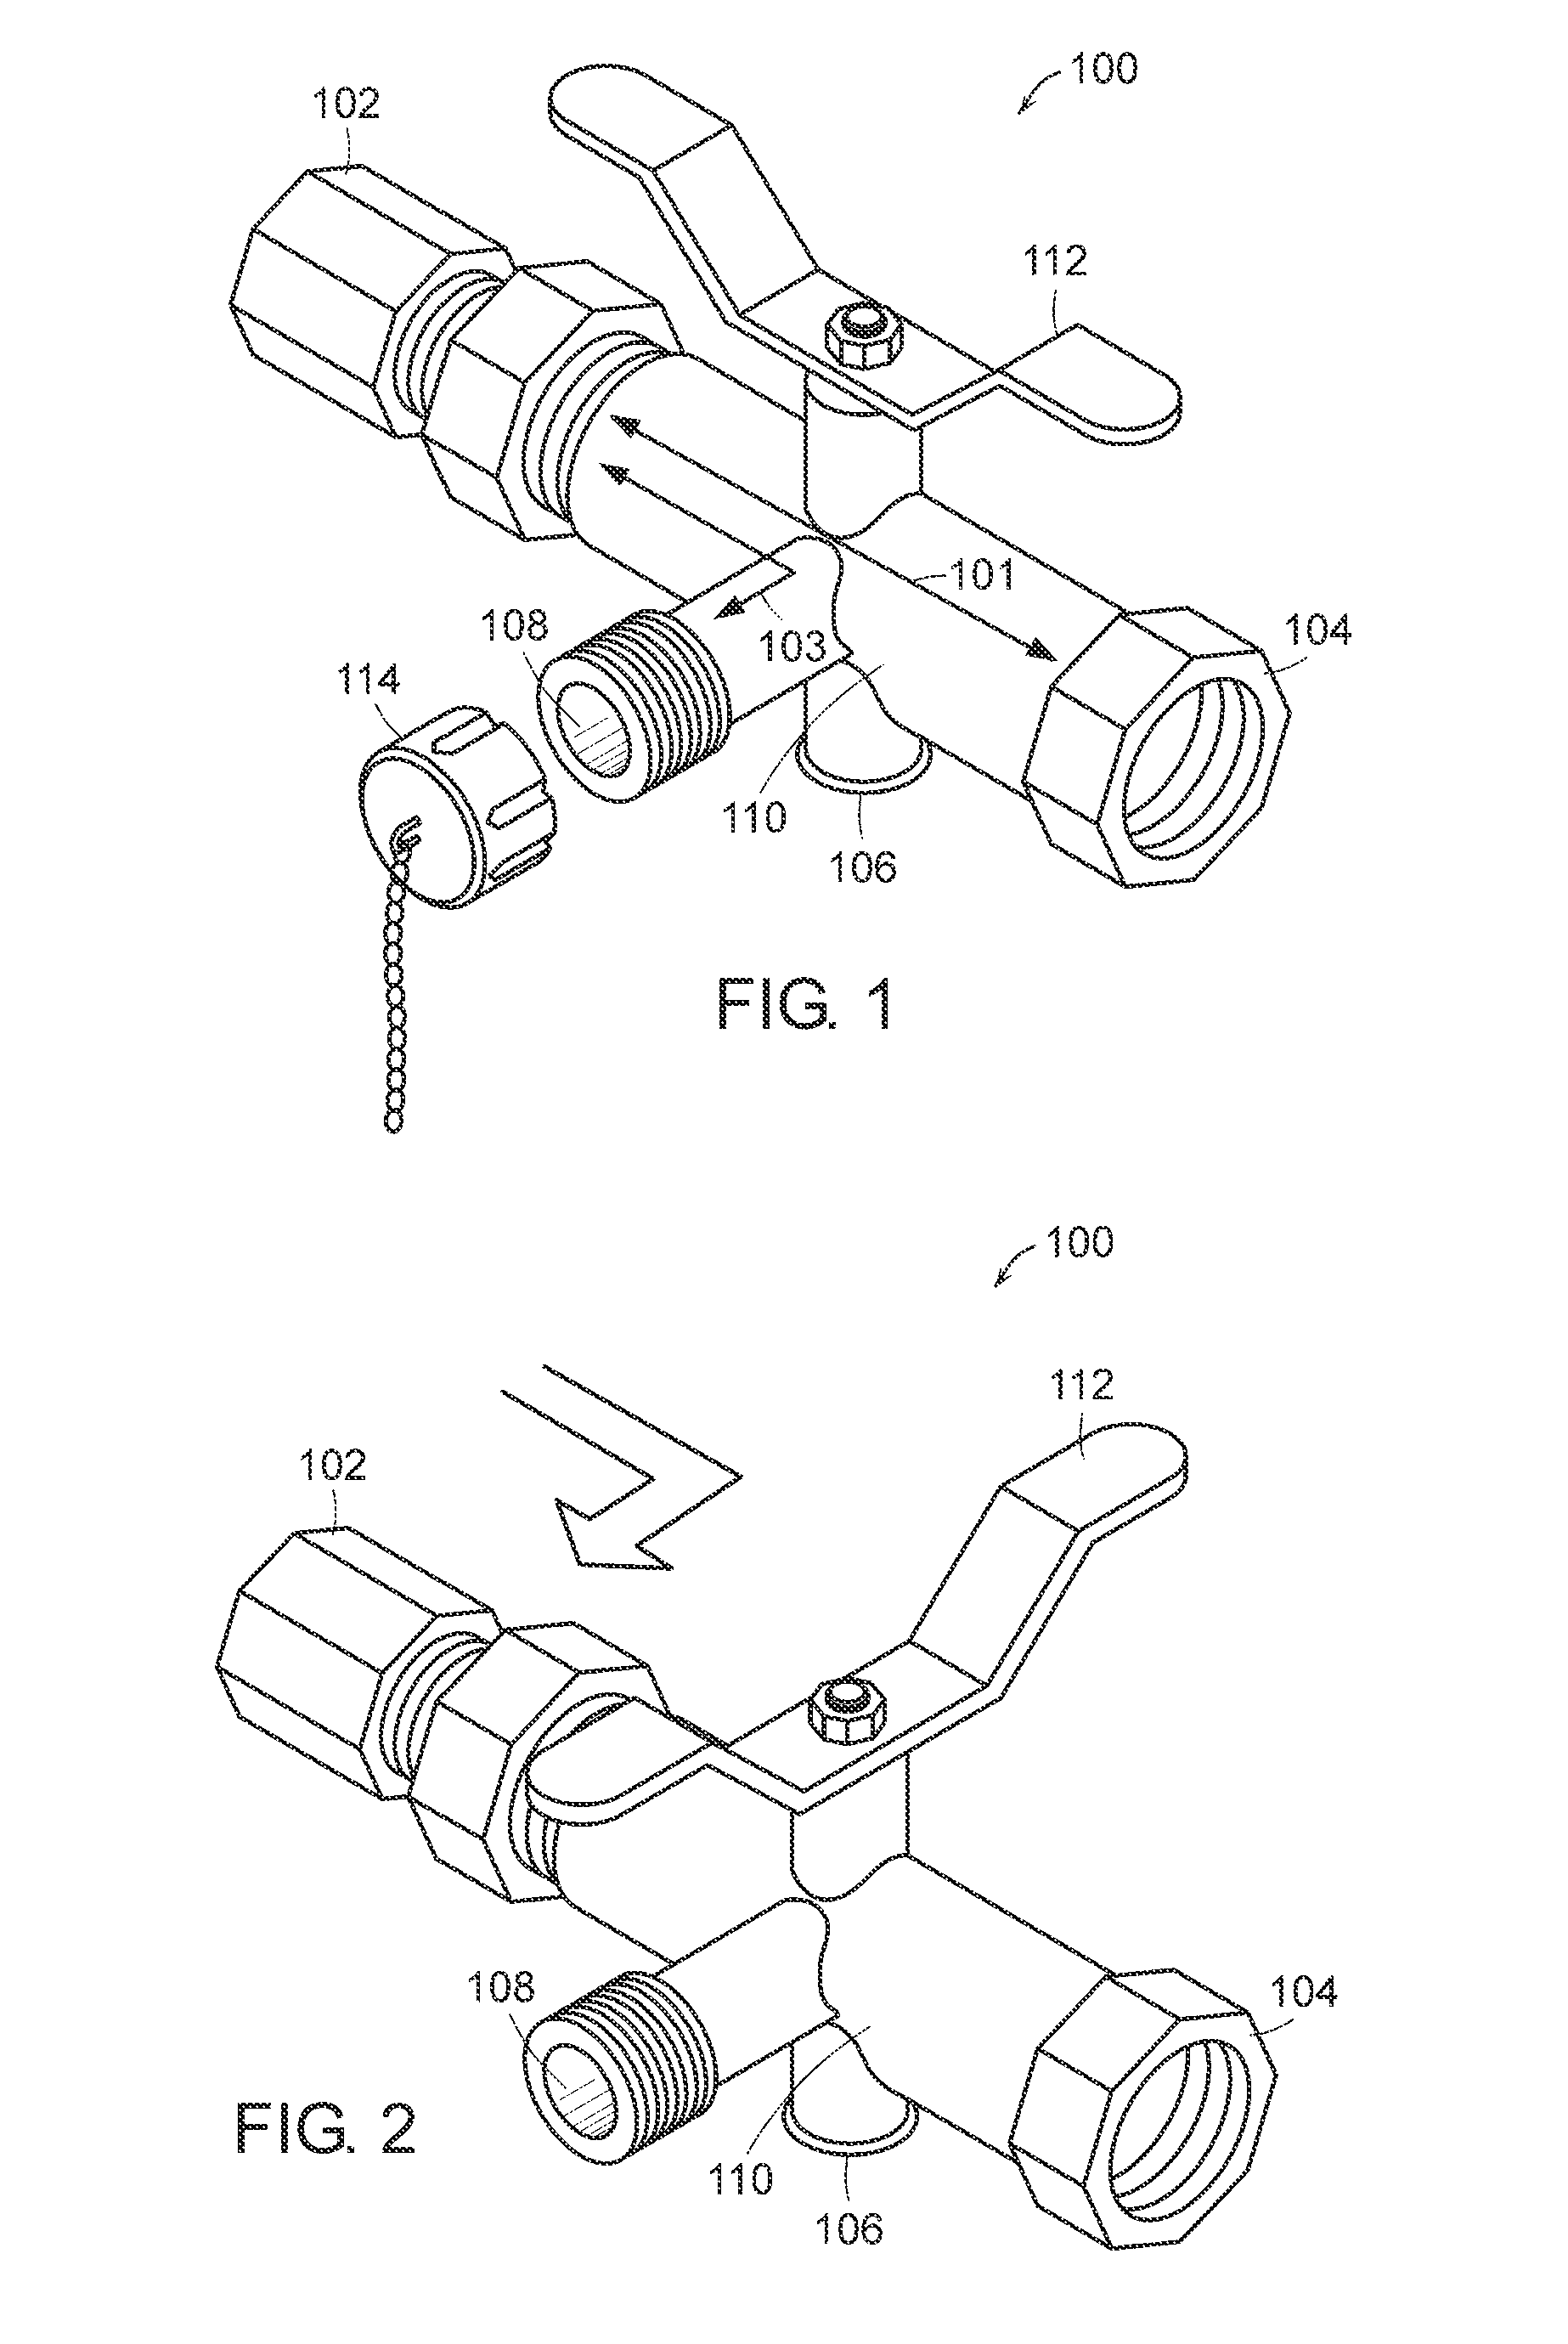 System for controlling fluid flow to an appliance